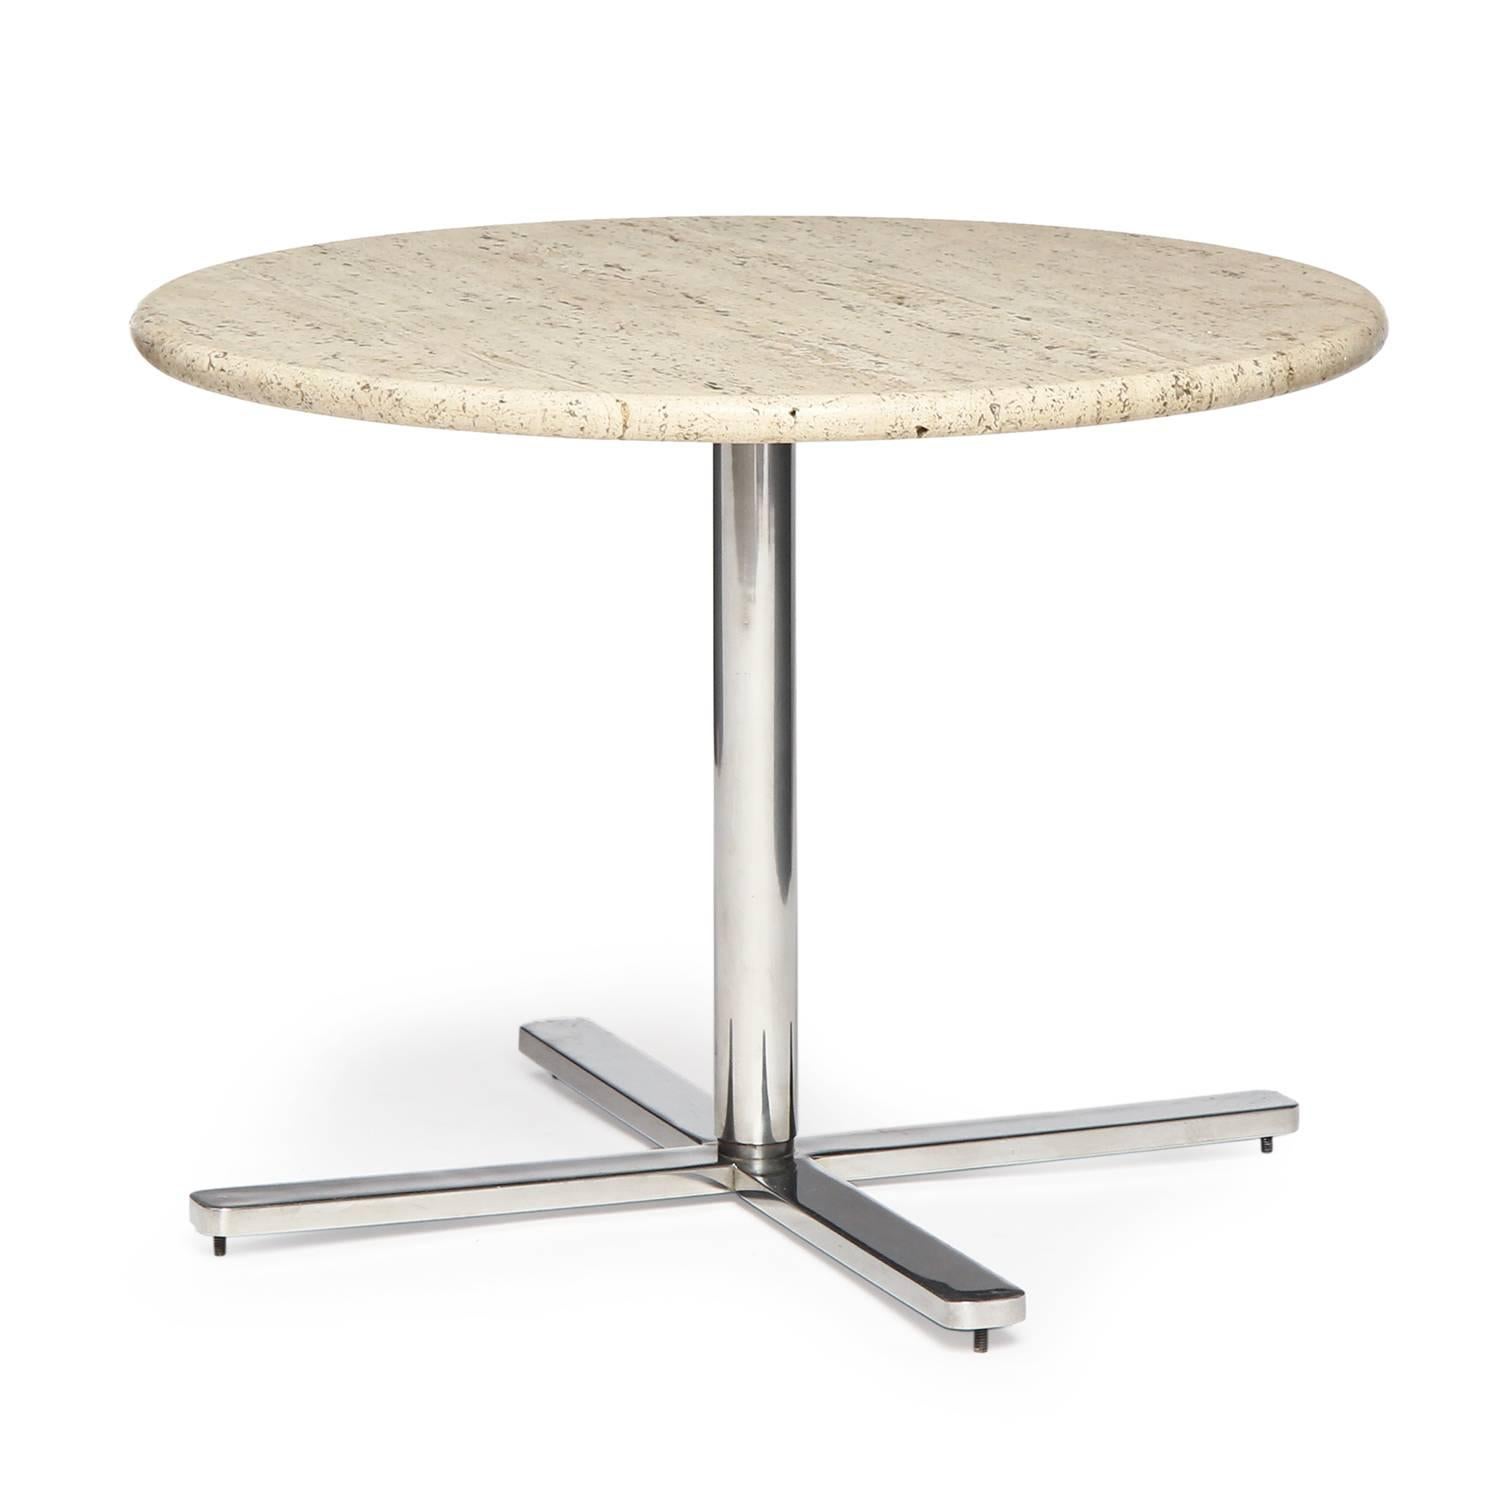 A spare and architectural pedestal table having a substantial chromed steel base supporting a round bevel-edged travertine marble top.